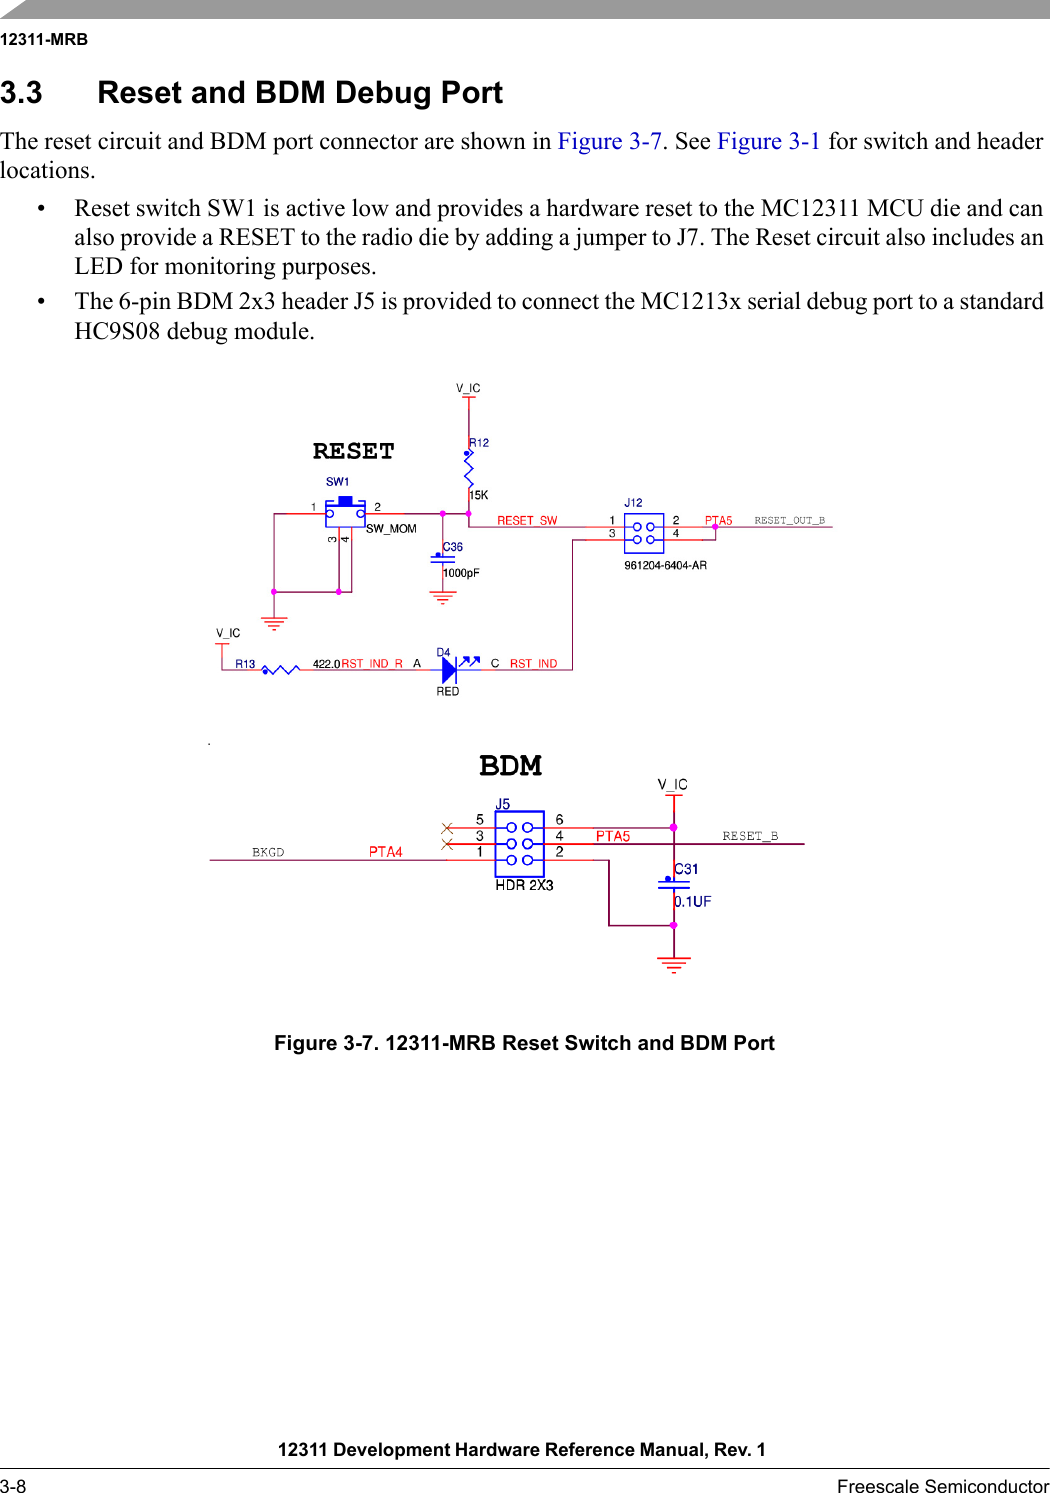 12311-MRB12311 Development Hardware Reference Manual, Rev. 1 3-8 Freescale Semiconductor3.3 Reset and BDM Debug PortThe reset circuit and BDM port connector are shown in Figure 3-7. See Figure 3-1 for switch and header locations.• Reset switch SW1 is active low and provides a hardware reset to the MC12311 MCU die and can also provide a RESET to the radio die by adding a jumper to J7. The Reset circuit also includes an LED for monitoring purposes.• The 6-pin BDM 2x3 header J5 is provided to connect the MC1213x serial debug port to a standard HC9S08 debug module.Figure 3-7. 12311-MRB Reset Switch and BDM Port